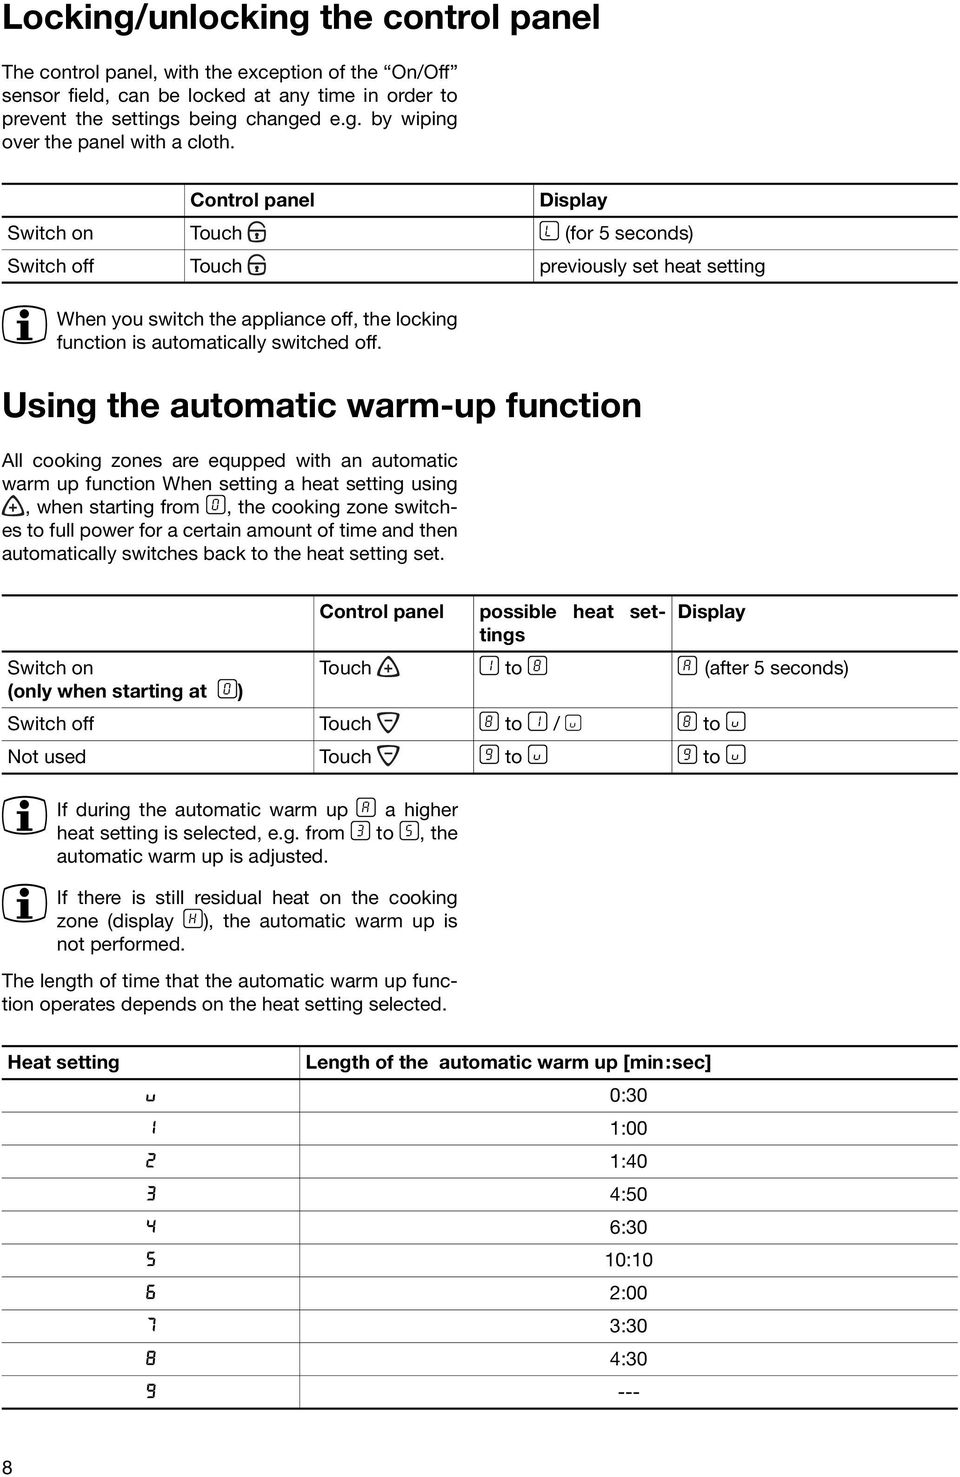 Using the automatic warm-up function All cooking zones are equpped with an automatic warm up function When setting a heat setting using, when starting from ¾, the cooking zone switches to full power